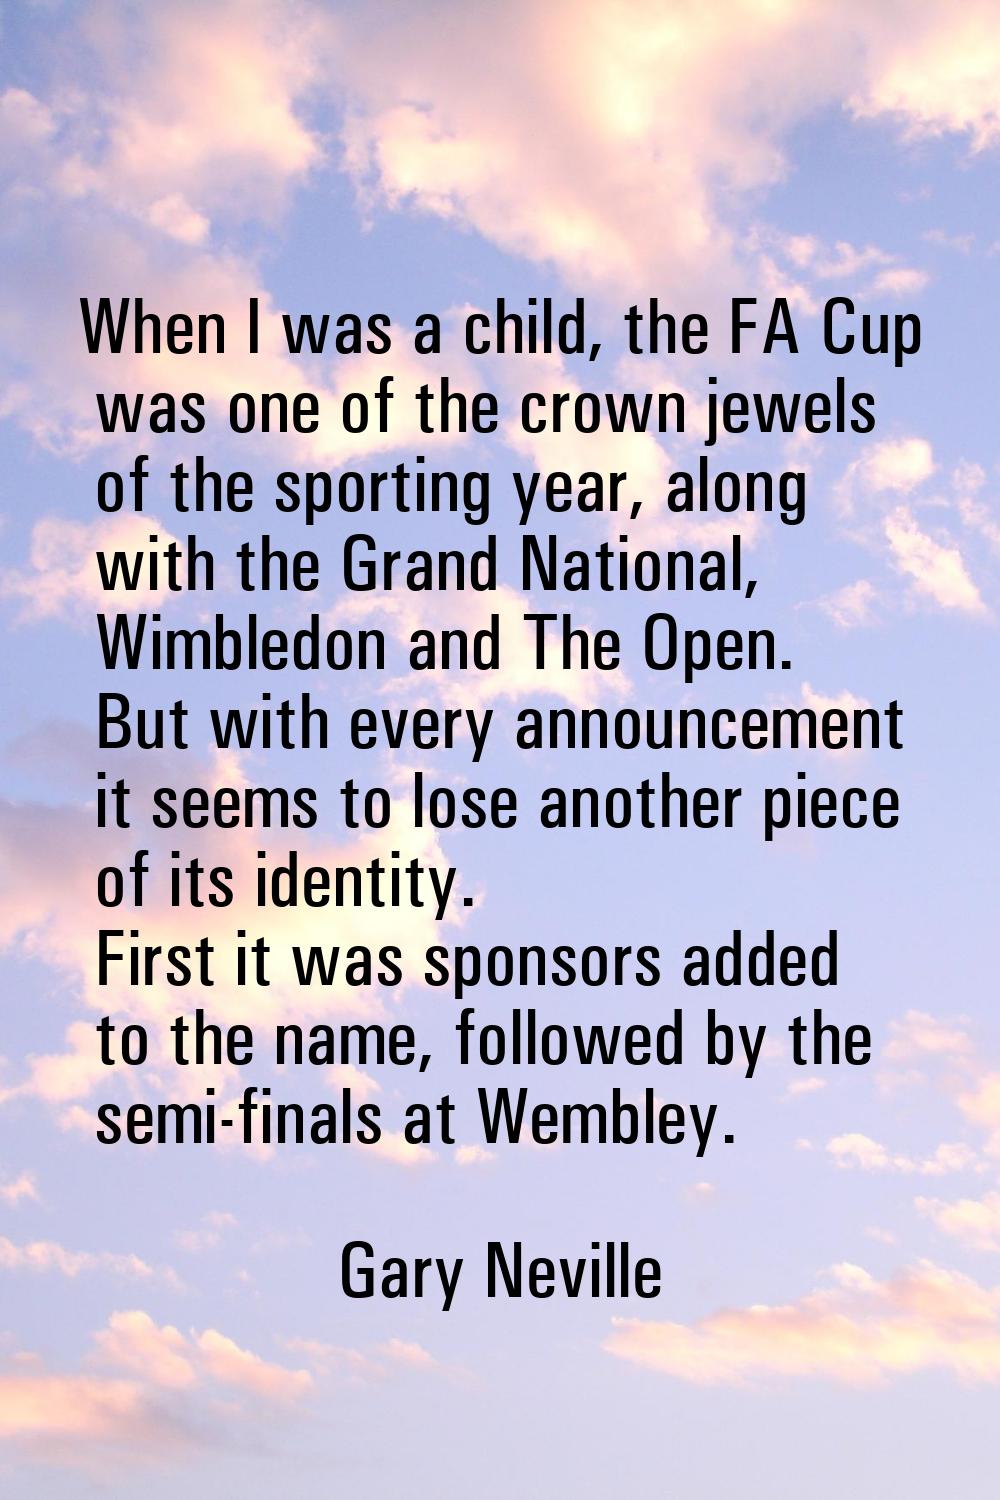 When I was a child, the FA Cup was one of the crown jewels of the sporting year, along with the Gra